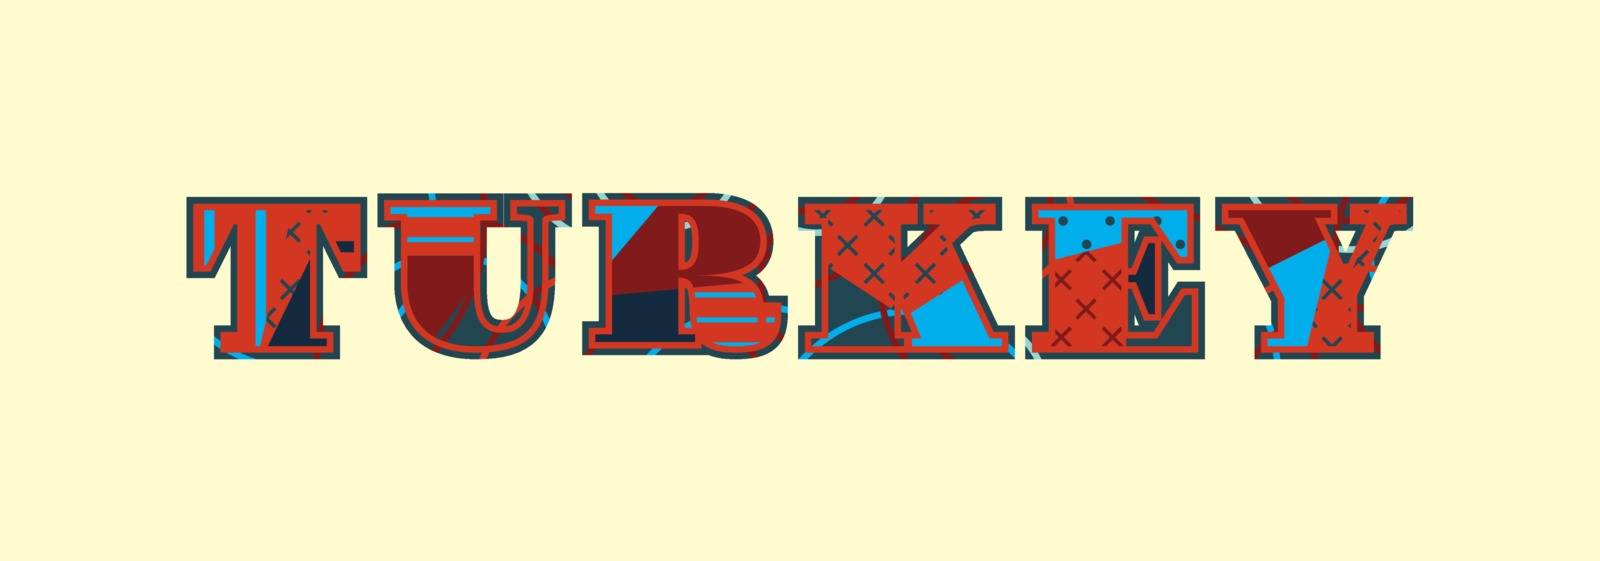 The word TURKEY concept written in colorful abstract typography. Vector EPS 10 available.